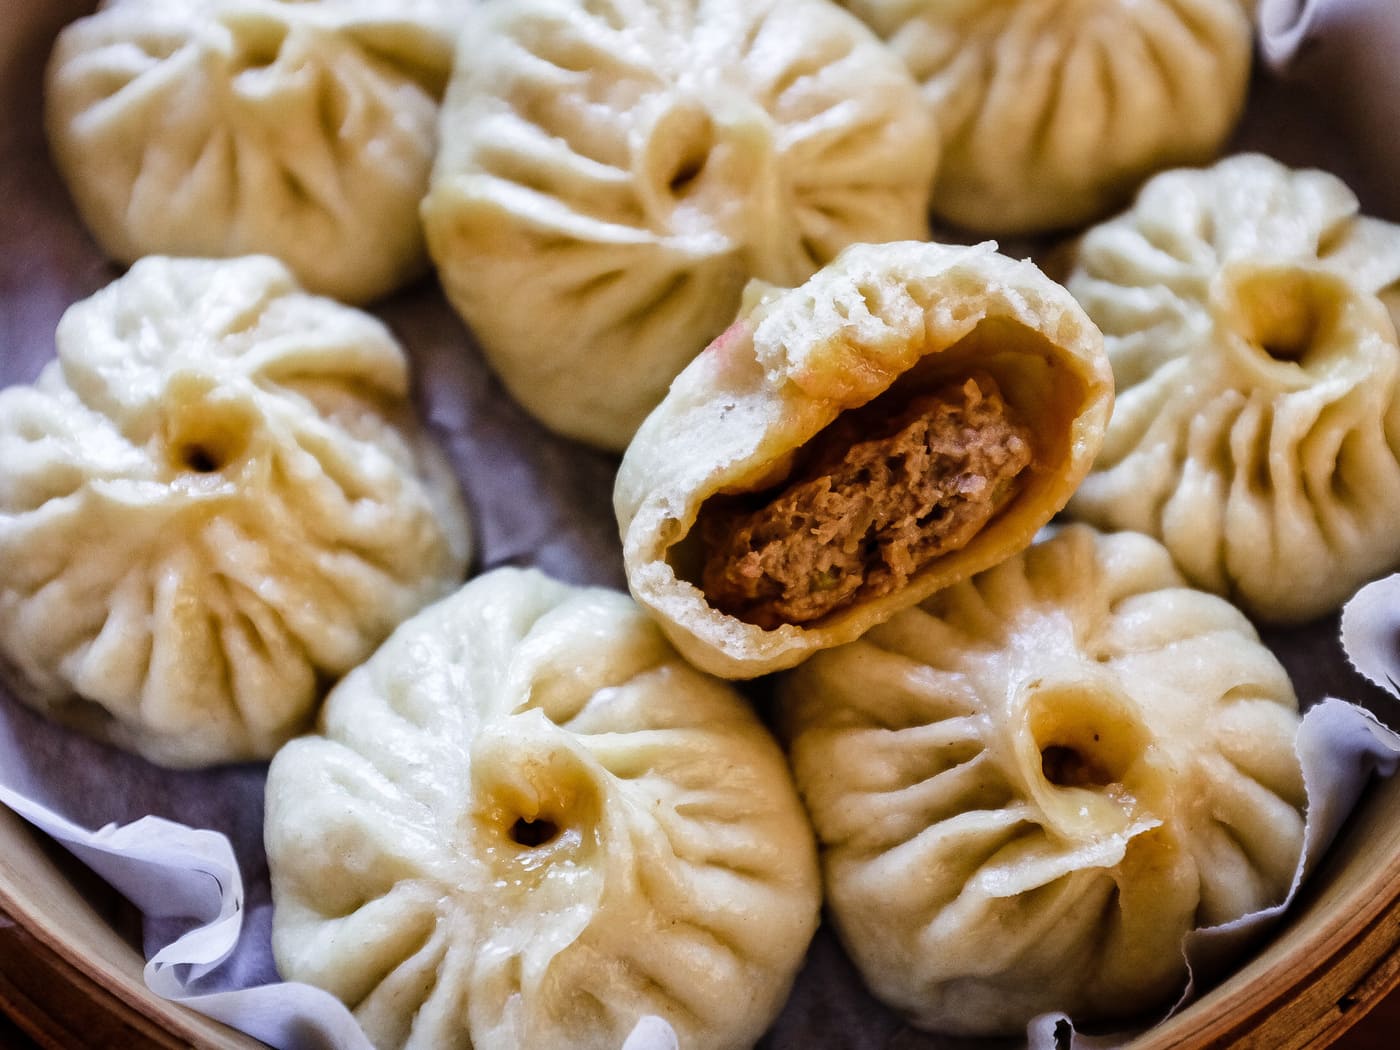 Steamed buns with meat filling: how to make flavorful Baozi at home8TTO MARKET